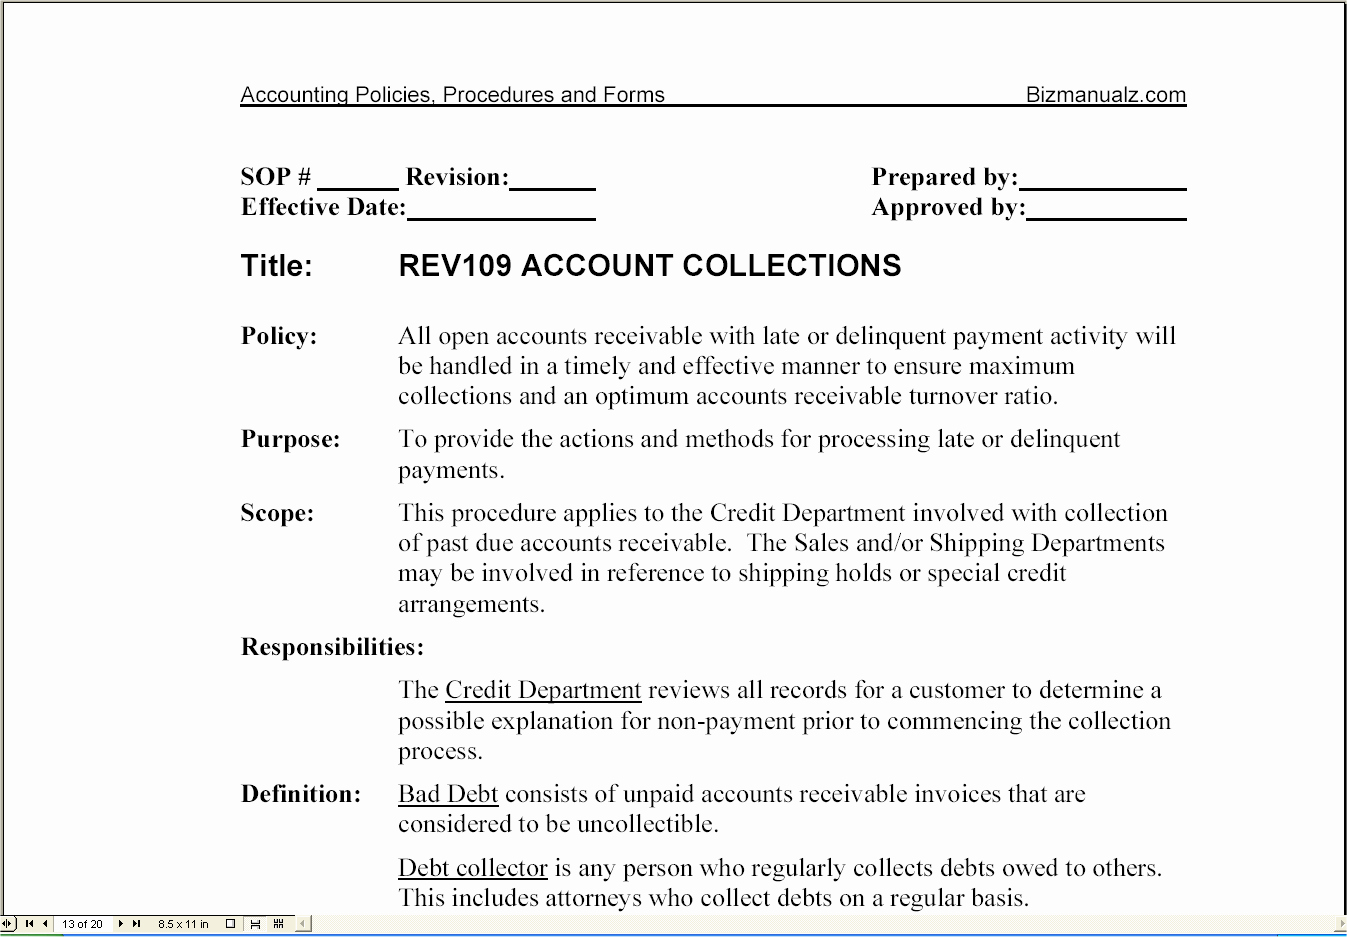 Policy and Procedure Template Free Awesome Bizmanualz Accounting Policies Procedures and forms Mbaware